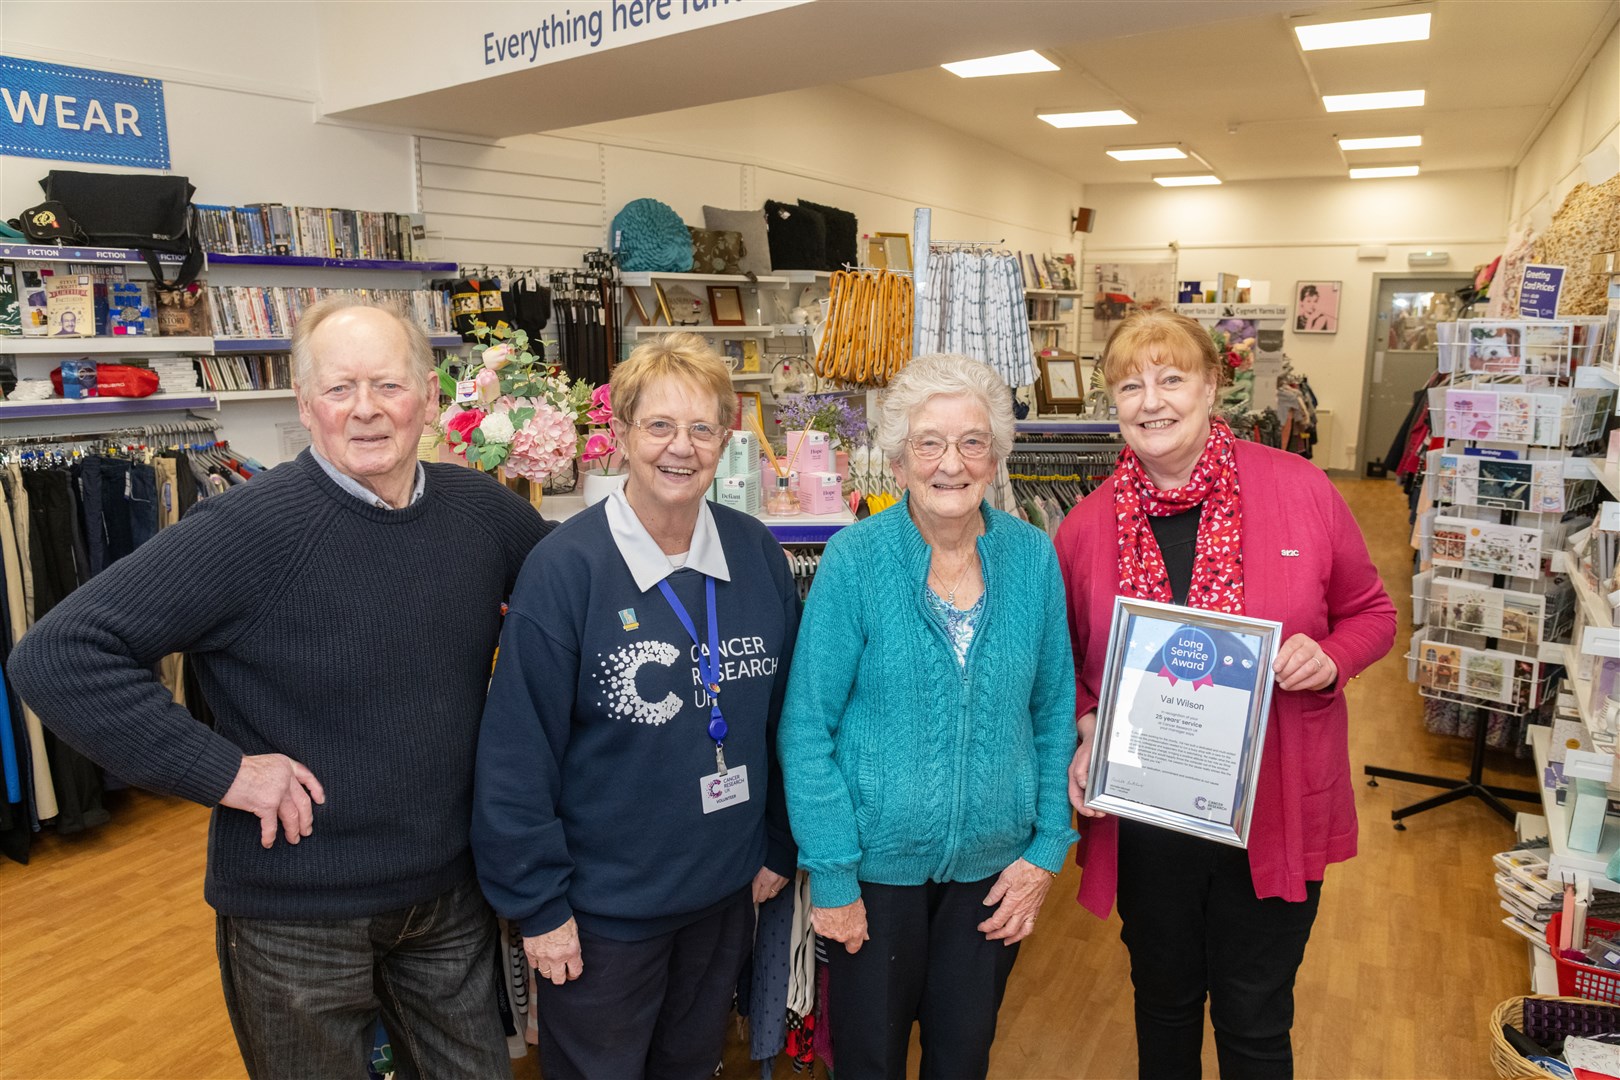 The Elgin team from left: John MacKintosh, Anne Rigg, Nan Cobban and Val Wilson...Val Wilson celebrates 25 years service at Cancer Research in Elgin...Picture: Beth Taylor.